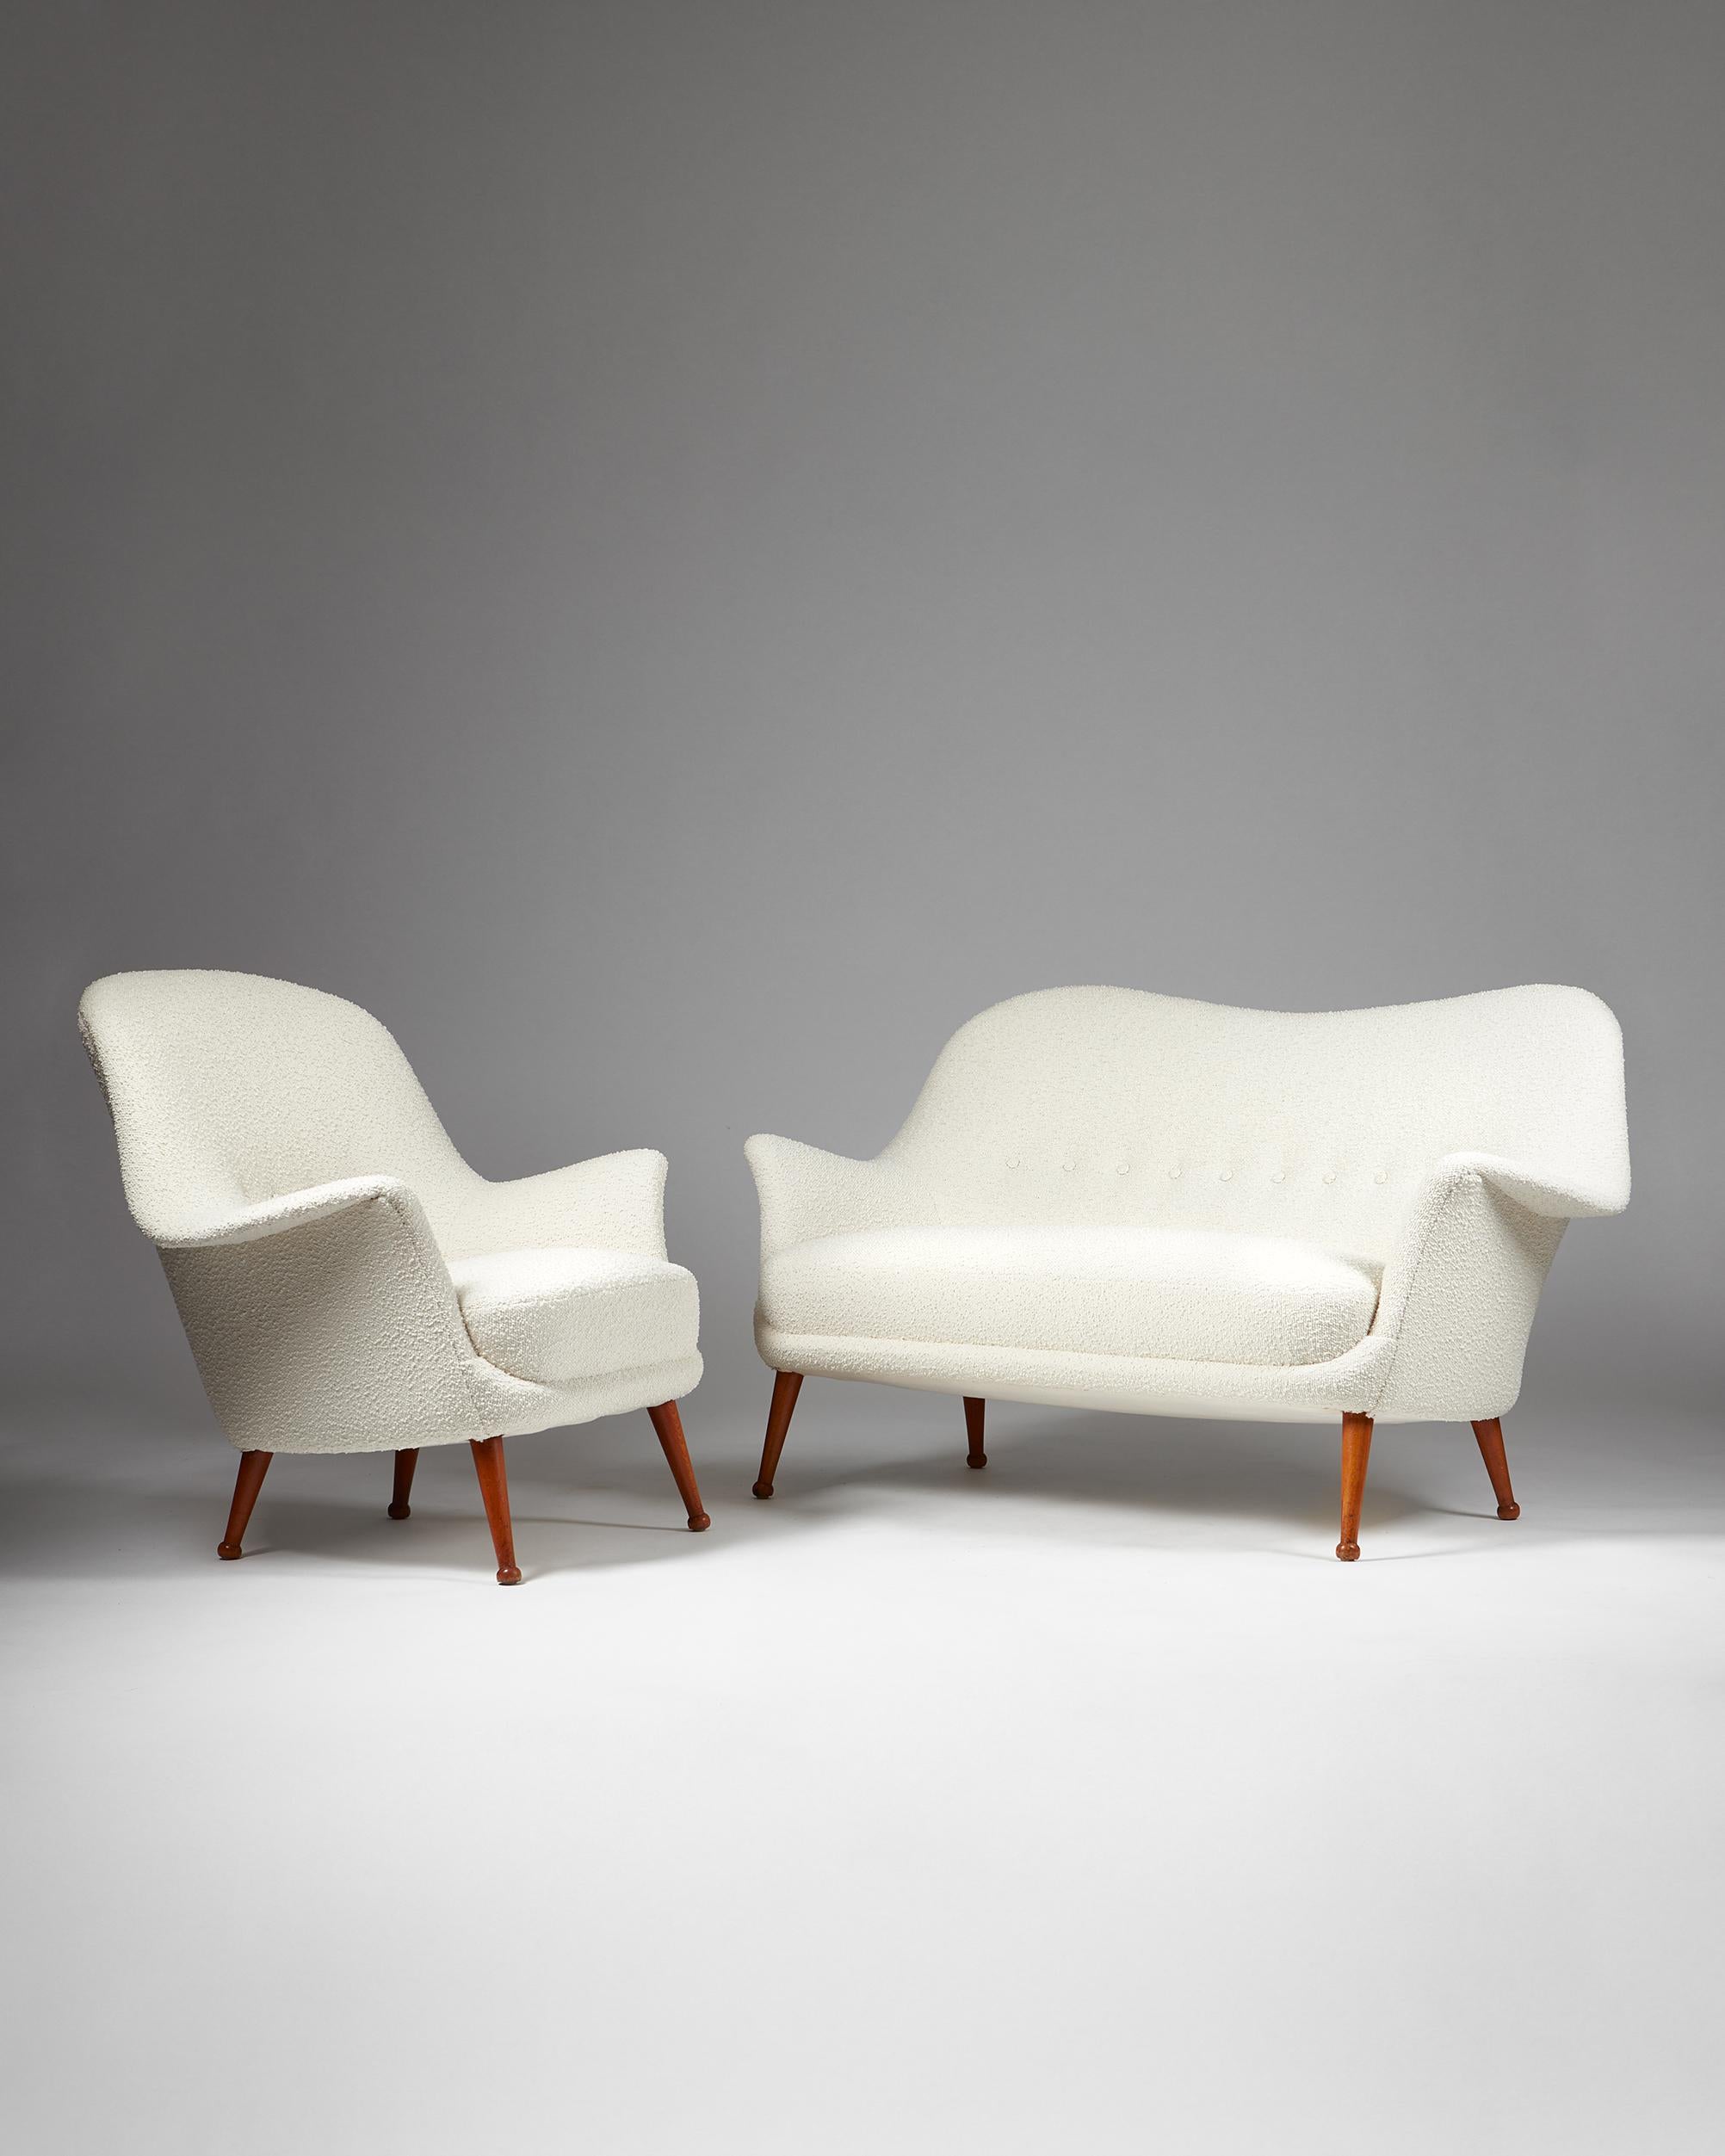 Sofa and armchair “Divina” designed by Arne Norell, for Norell Möbler,
Sweden. 1950s.
Lacquered wood and upholstery in Boucle fabric.

This “Divina” sofa and armchair model combines the Swedish designer Arne Norell’s use of sculptural forms with